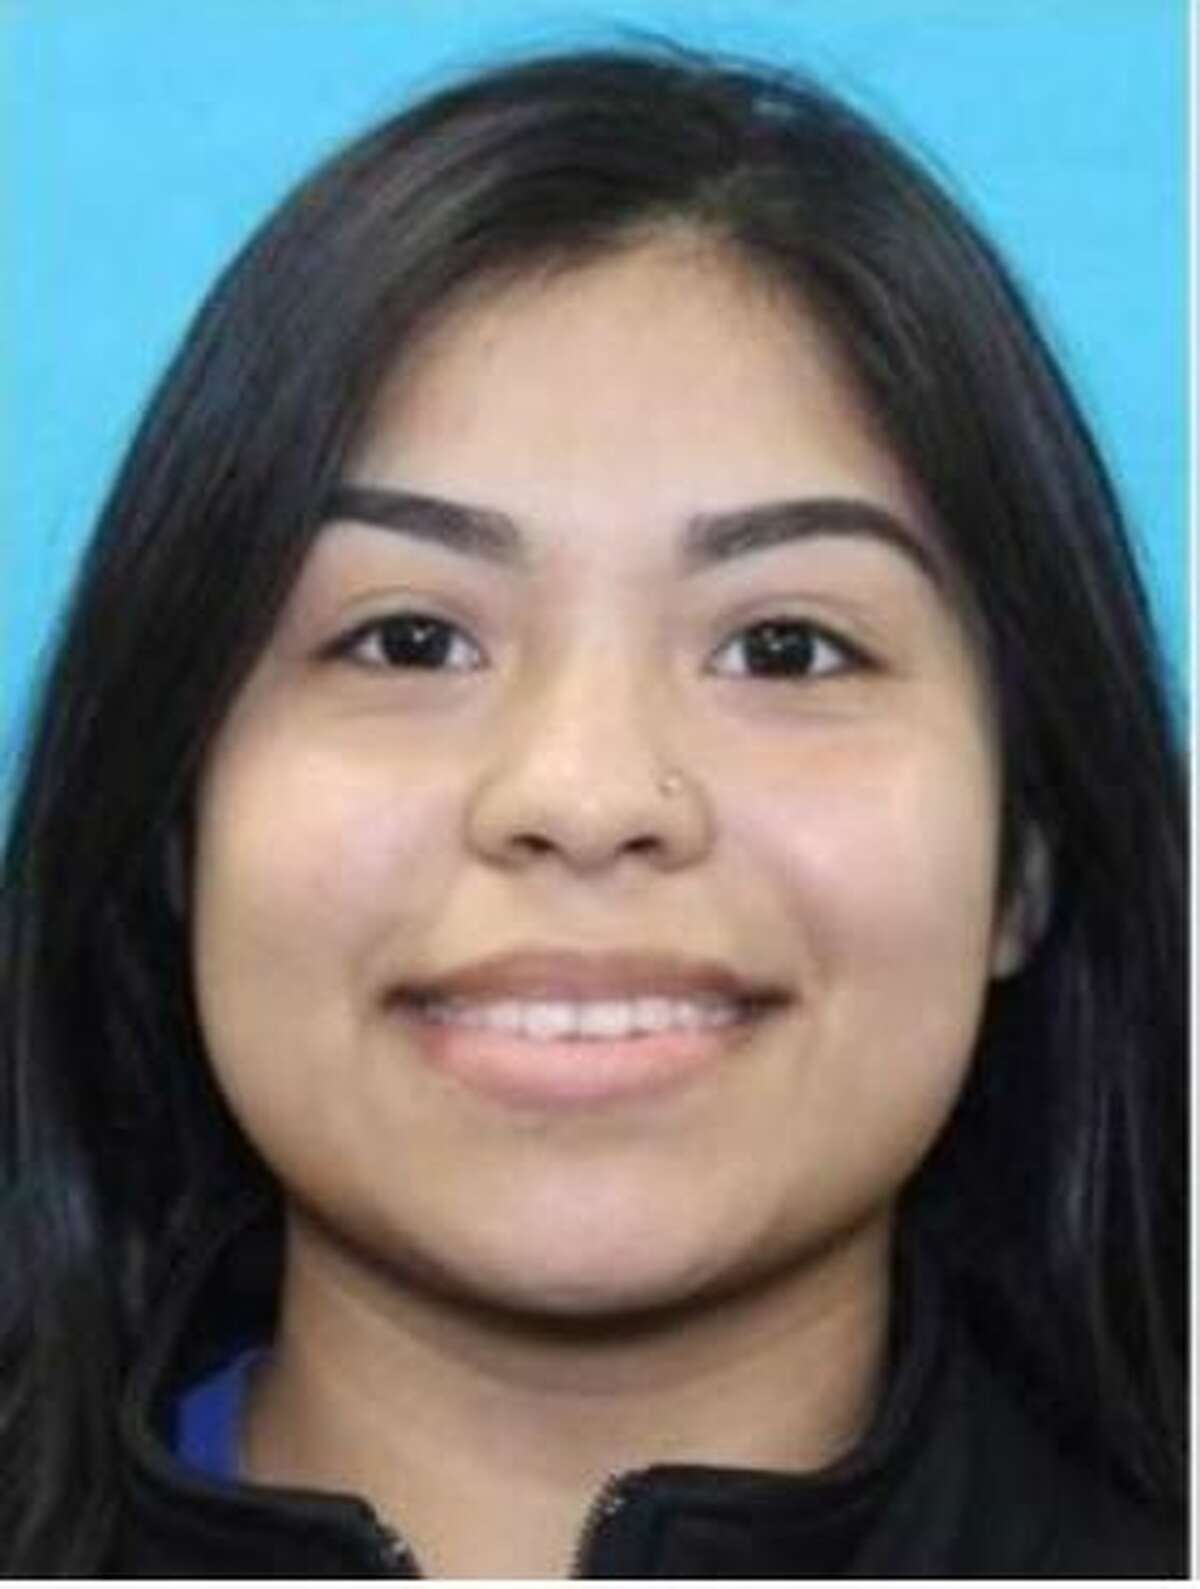 Genesis Barrondo, a 20-year-old reported missing, is in a coma at Ben Taub Hospital, authorities confirmed Monday.